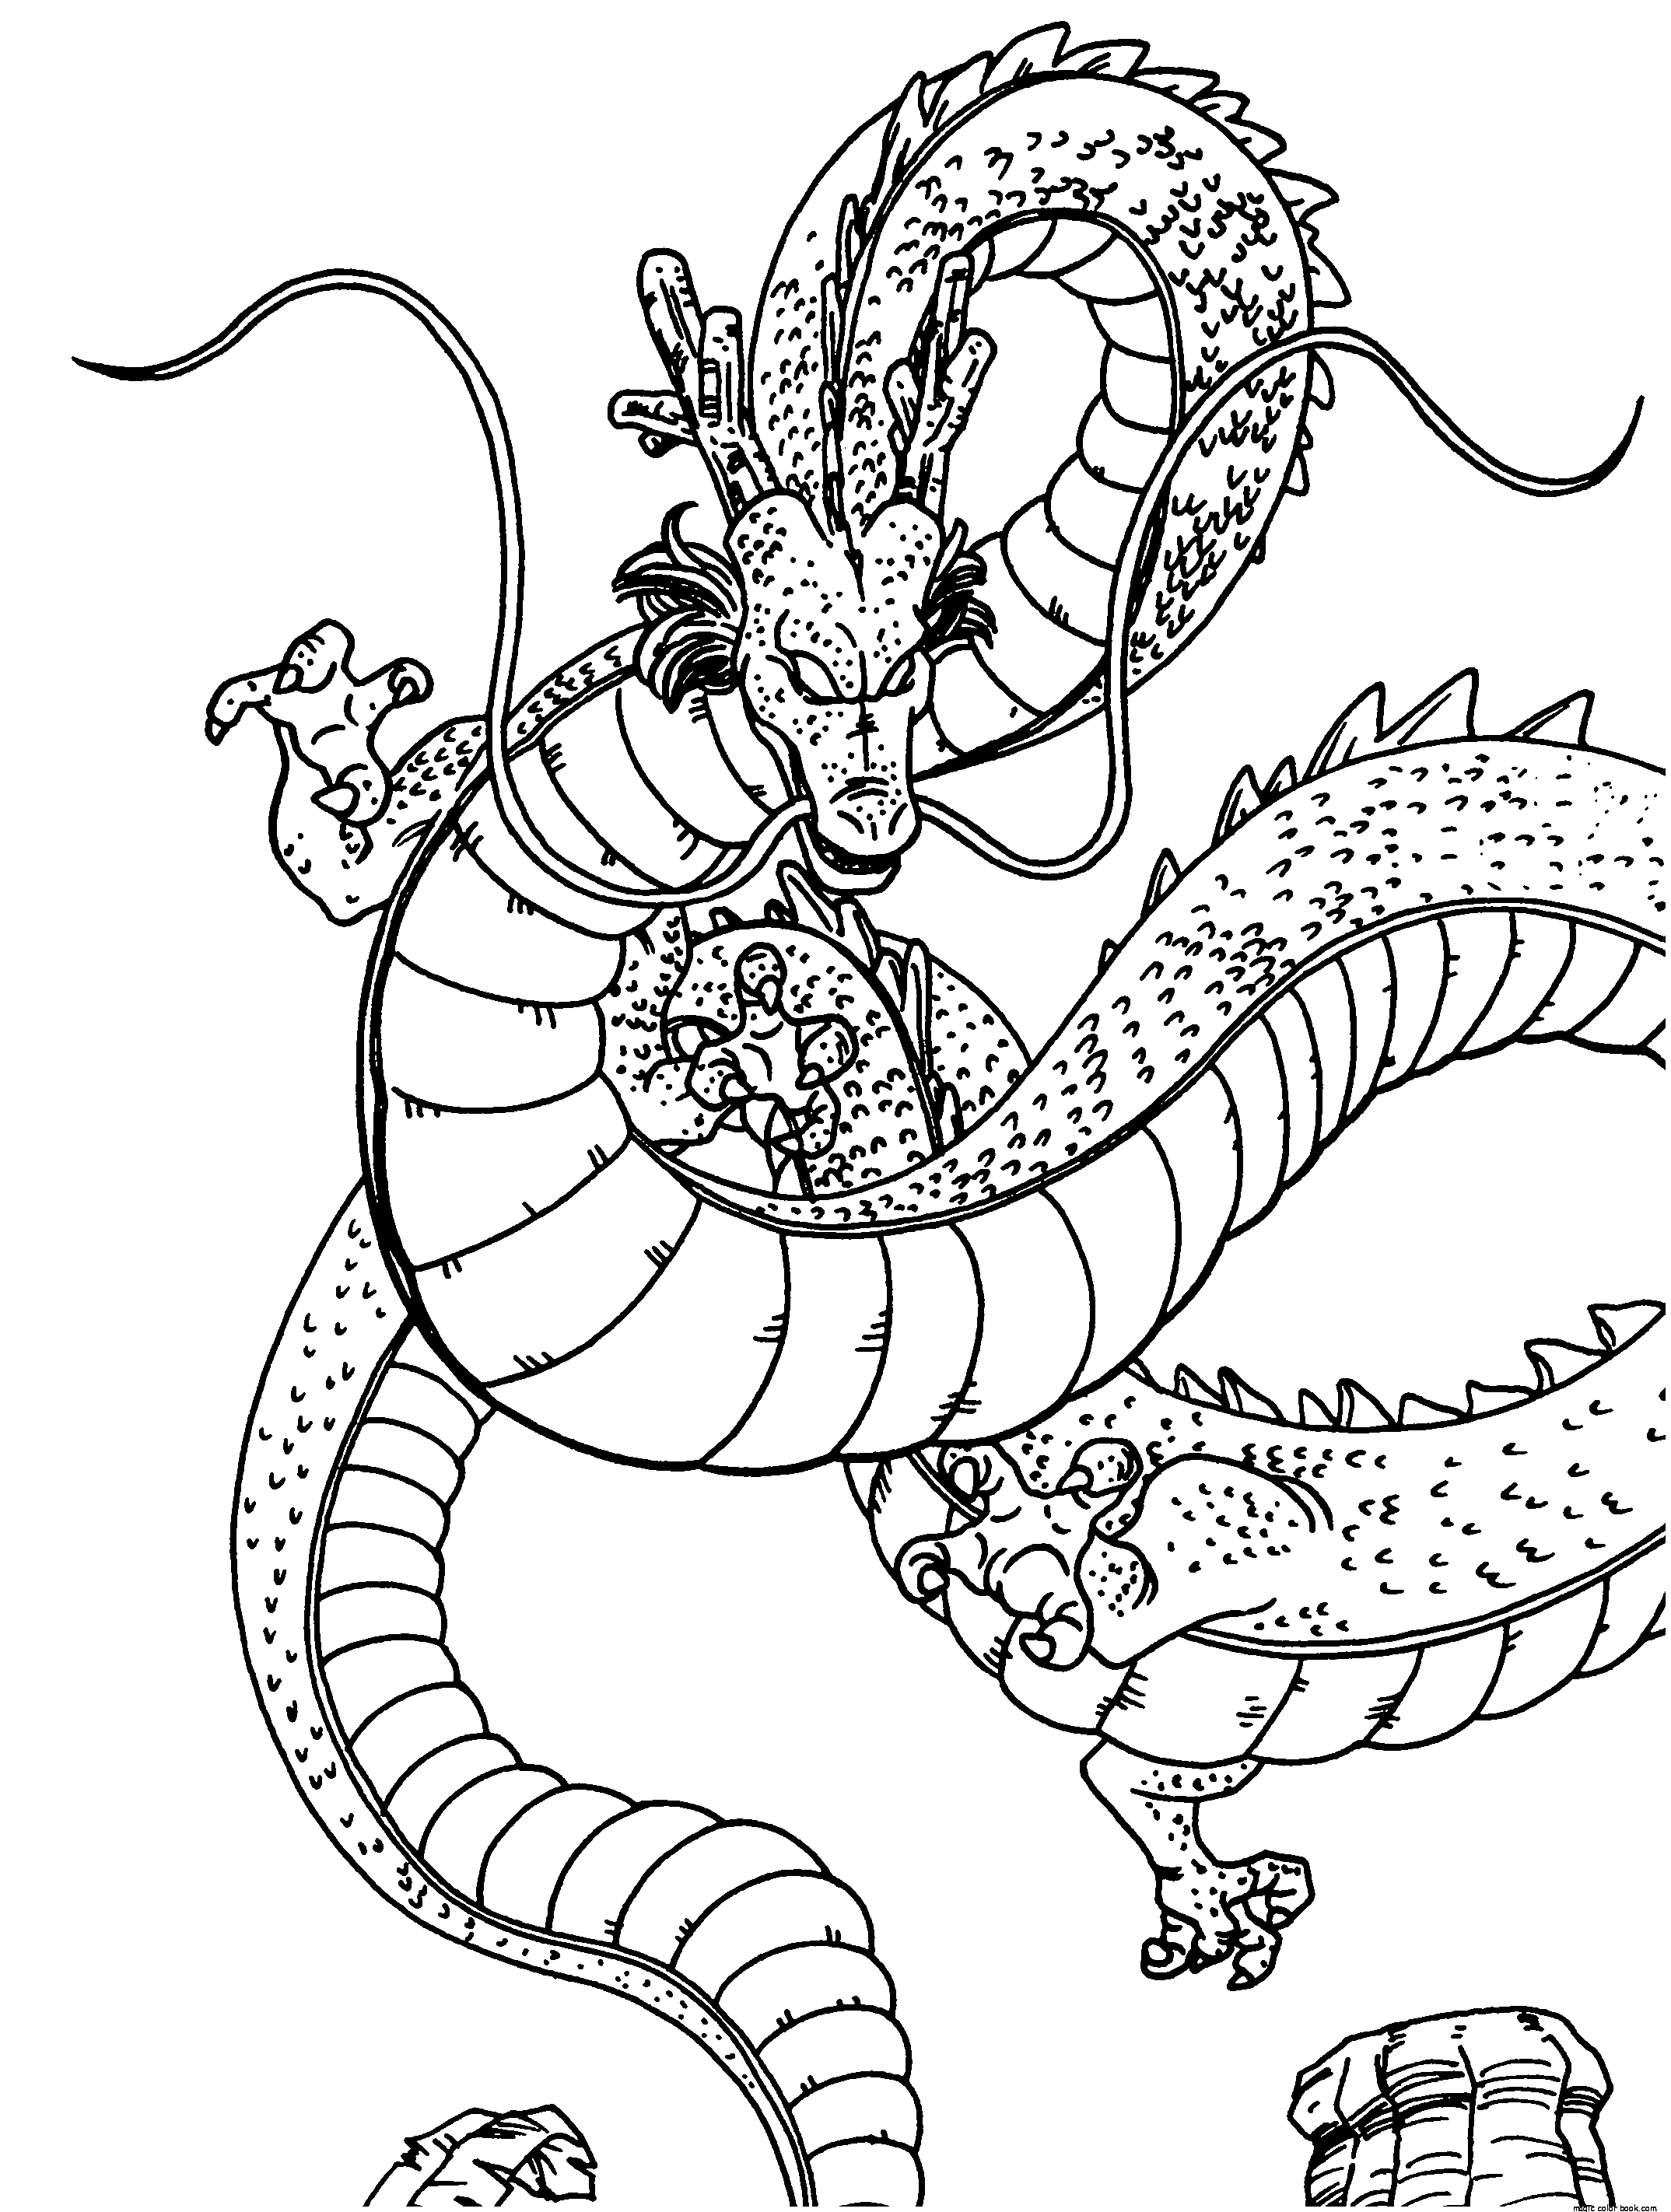 dragon ball z color dragon ball coloring pages best coloring pages for kids color dragon z ball 